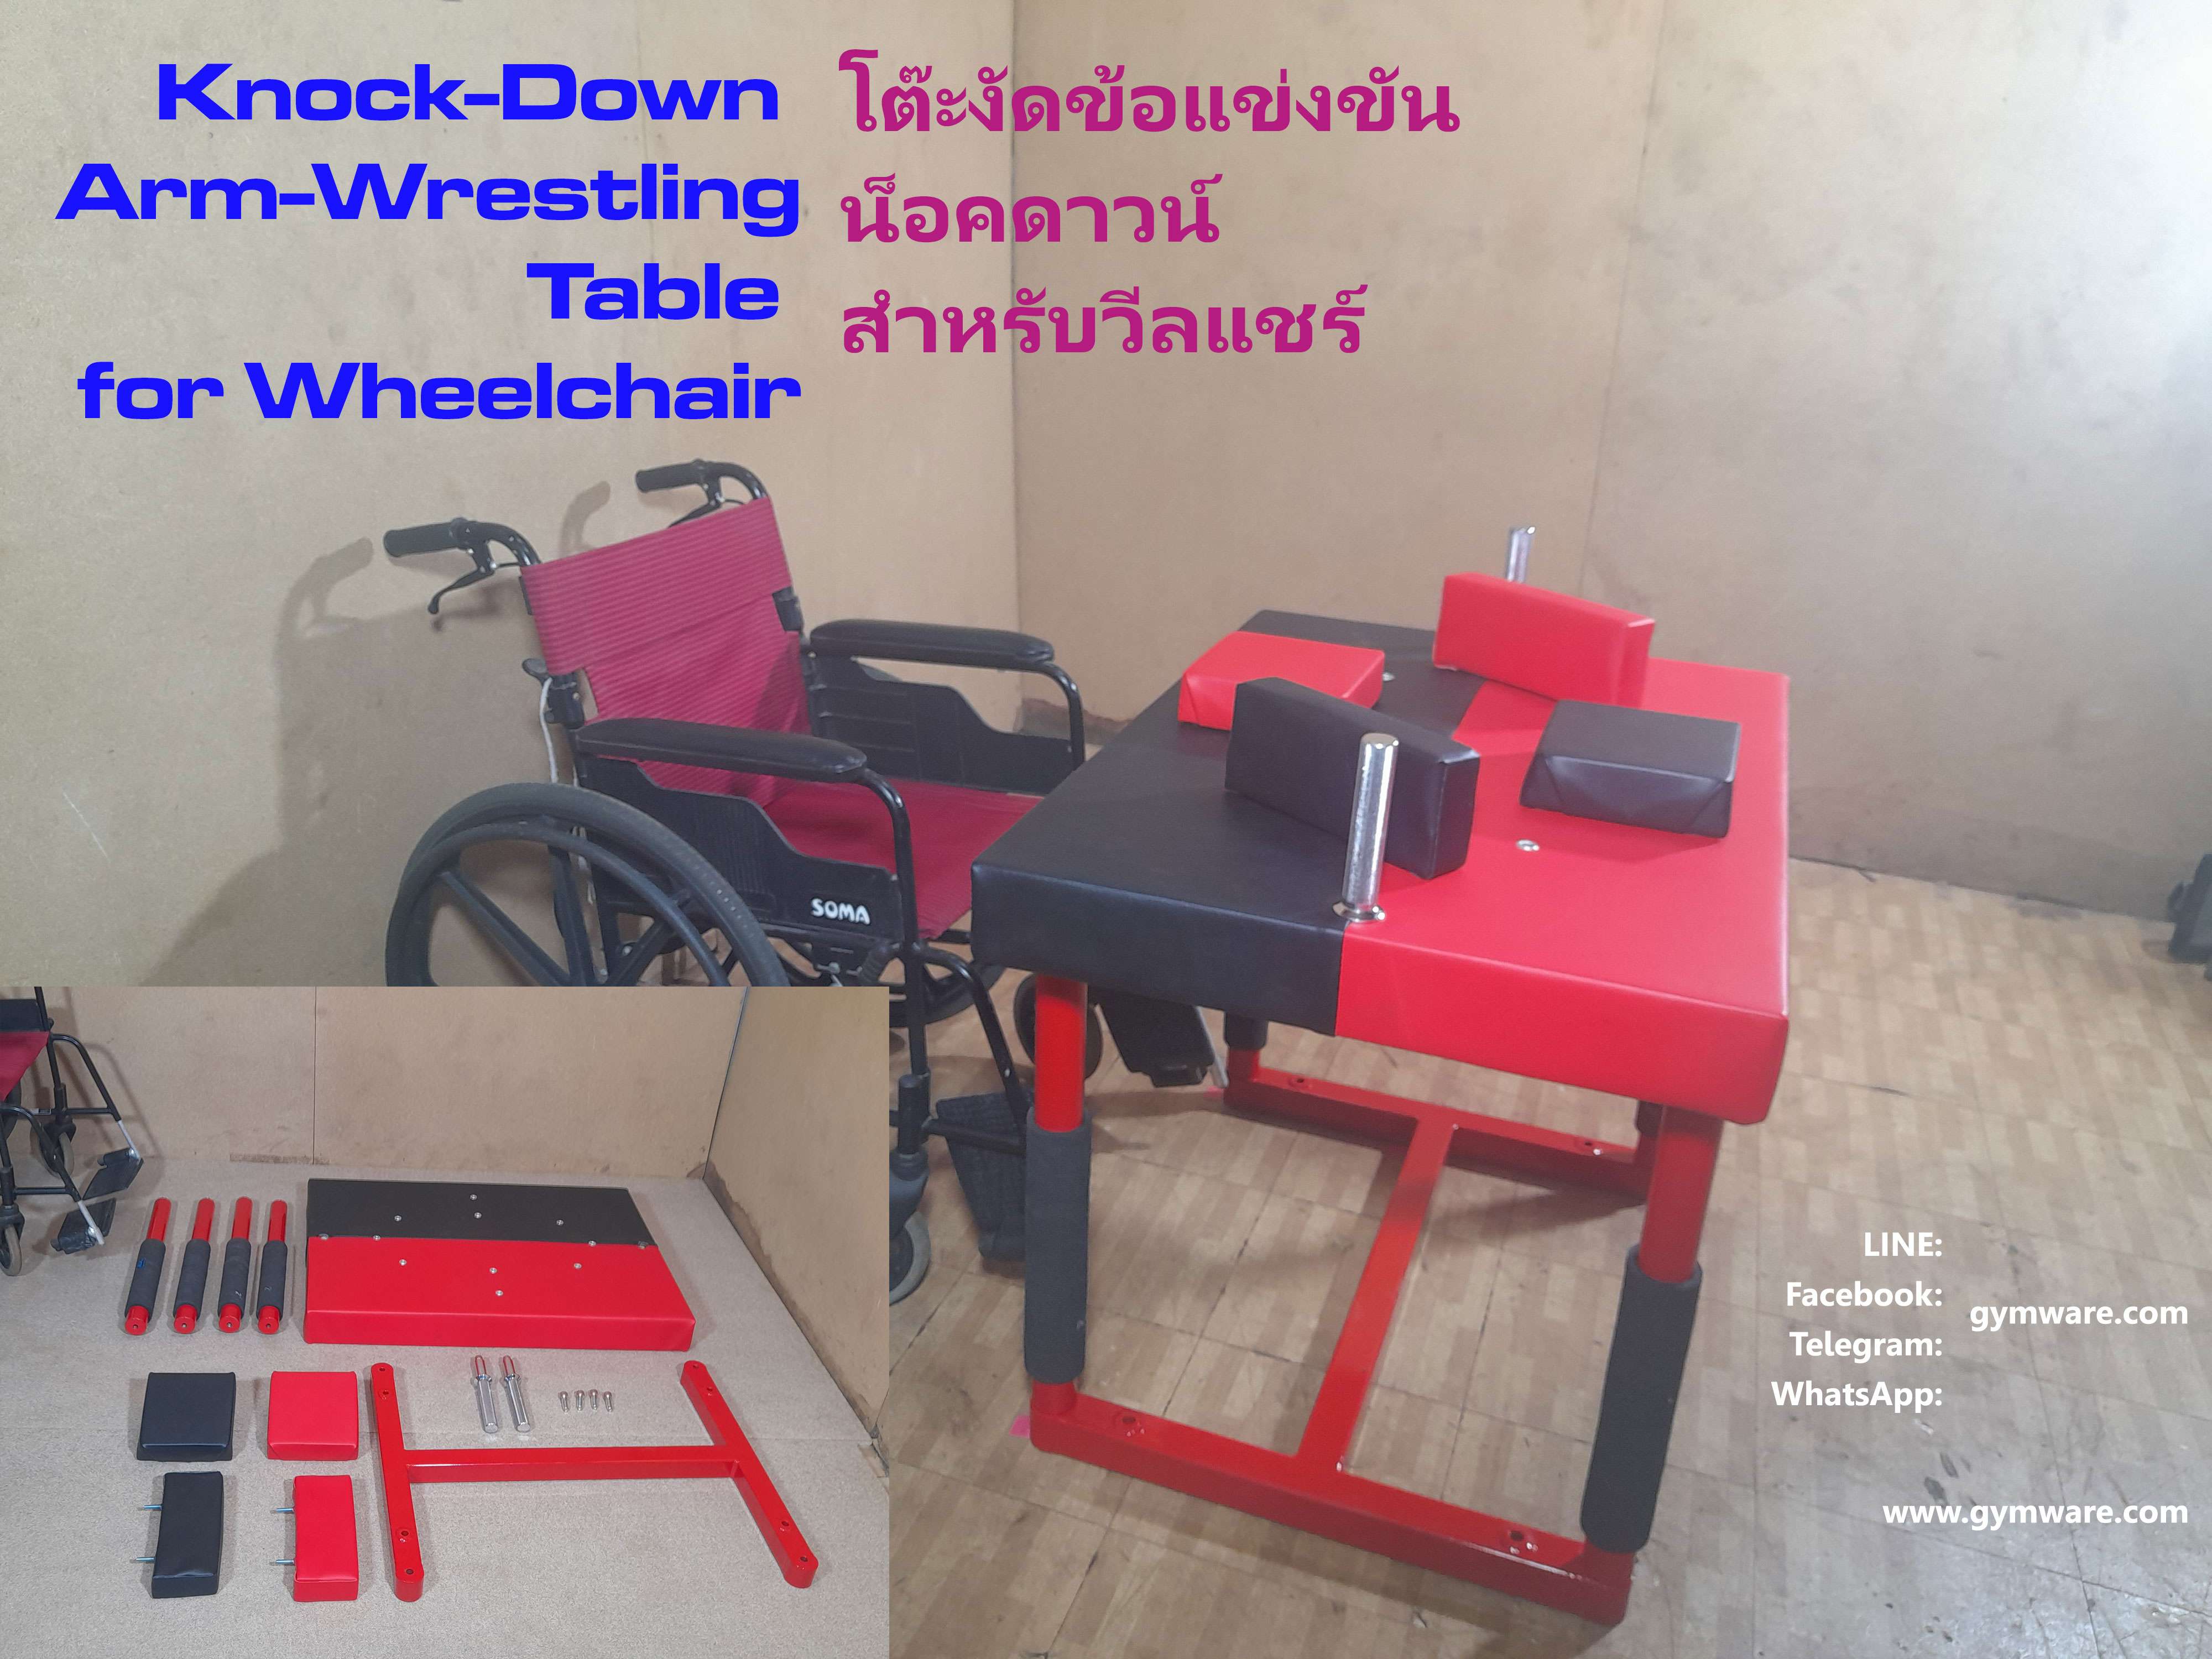 Knock-Down Arm-Wrestling Table for Wheelchair